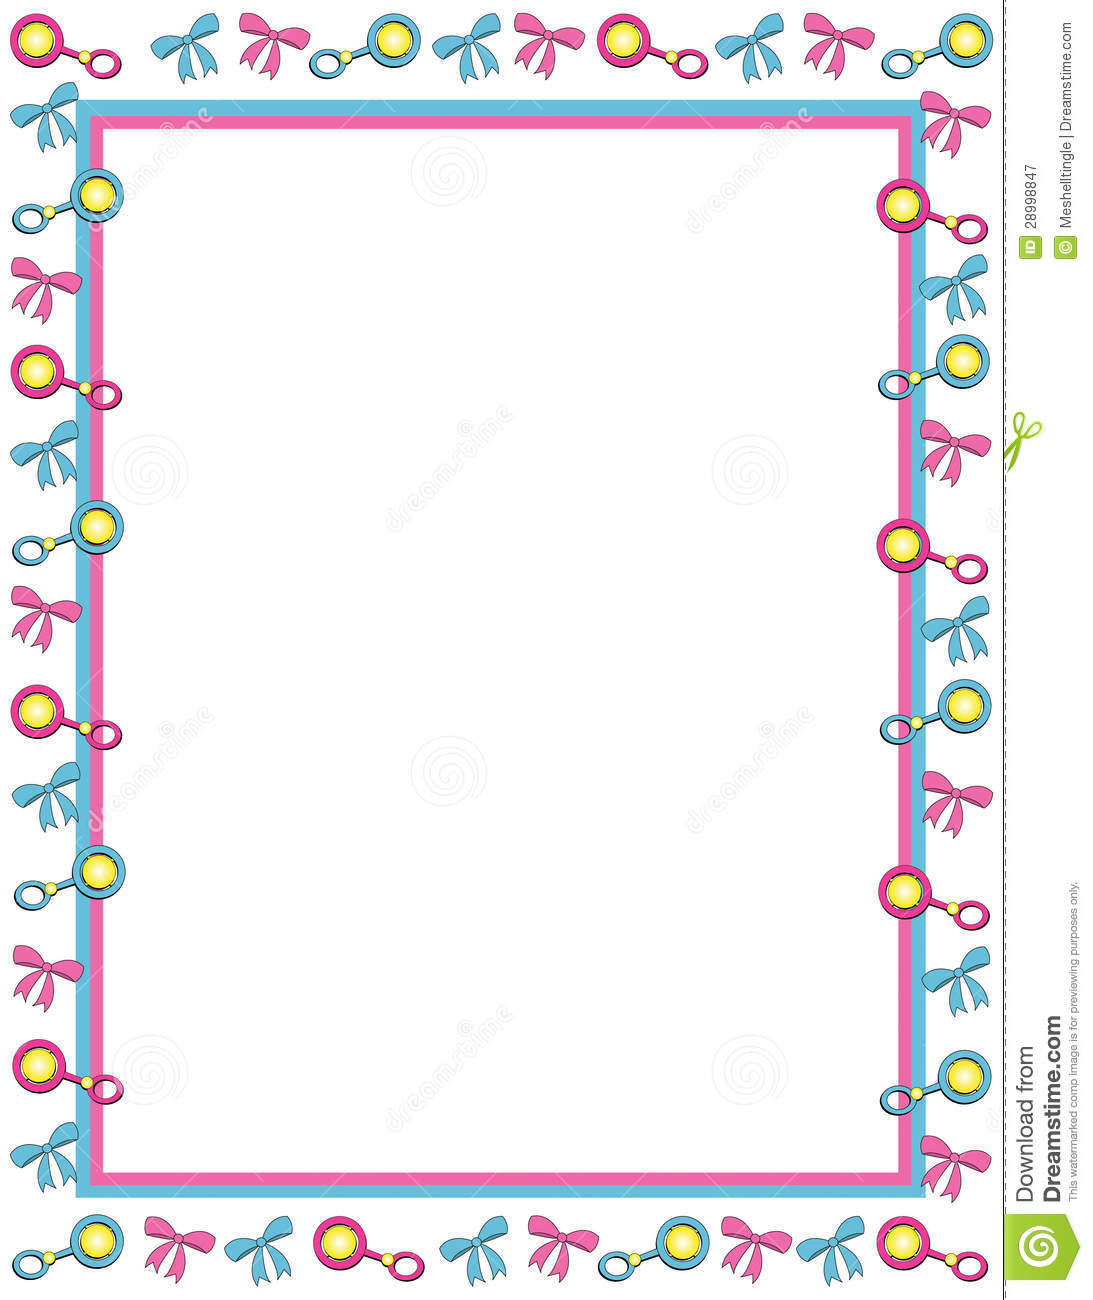 baby clip art borders and frames - photo #15